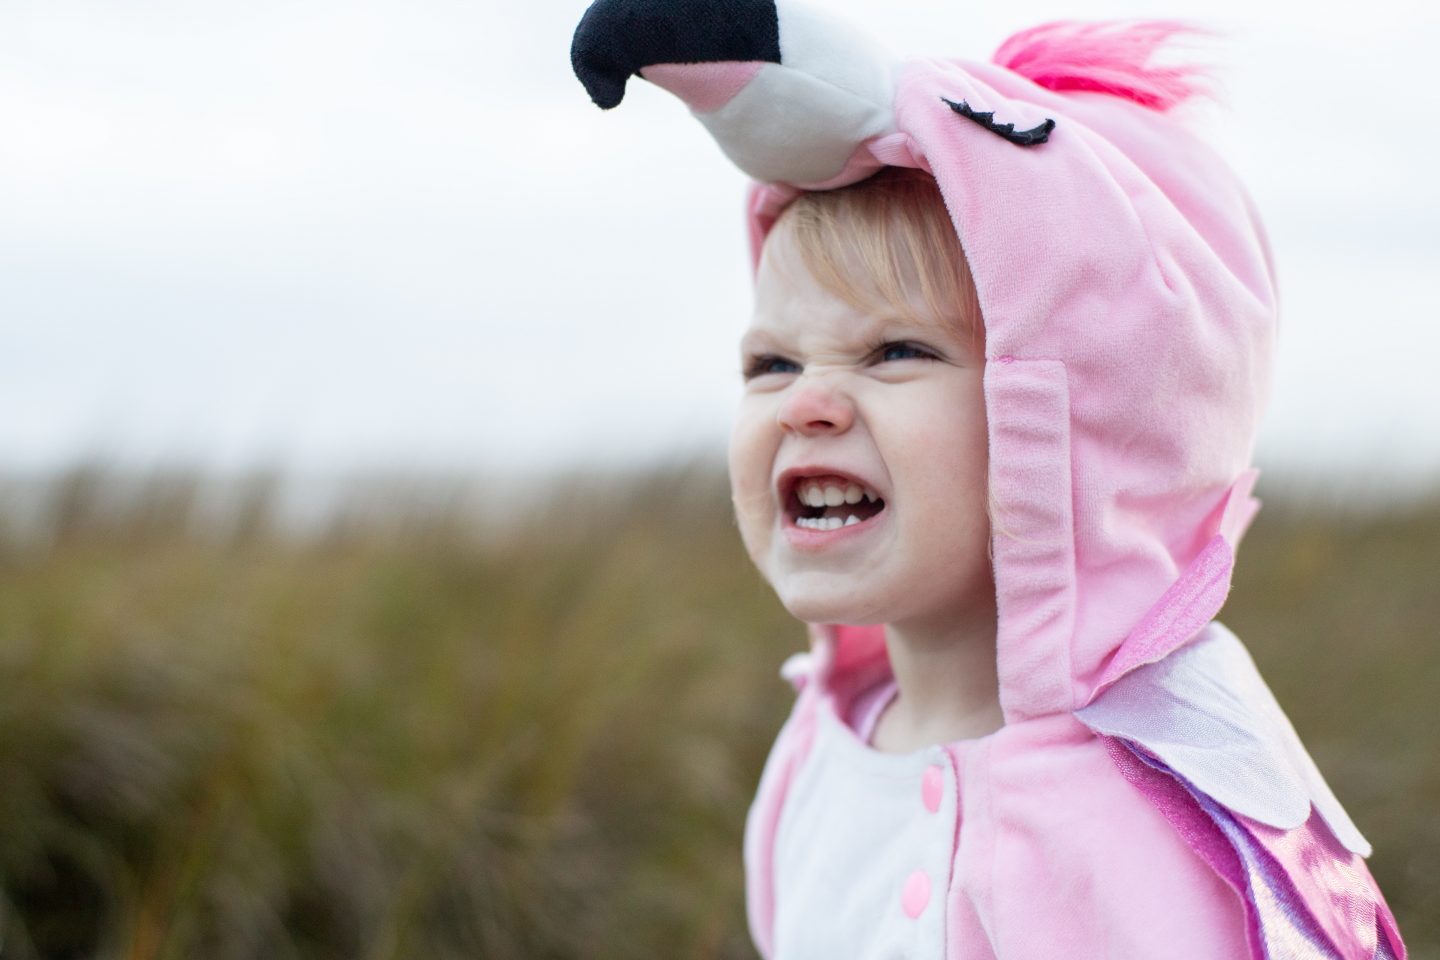 A photo of the head and shoulders of a little girl, maybe 4 or 5 years old. A field is behind her. She's wearing a pink flamingo outfit which a hood up where the beak is. She has her teeth bared like she's assertive, fierce, happy and confident.